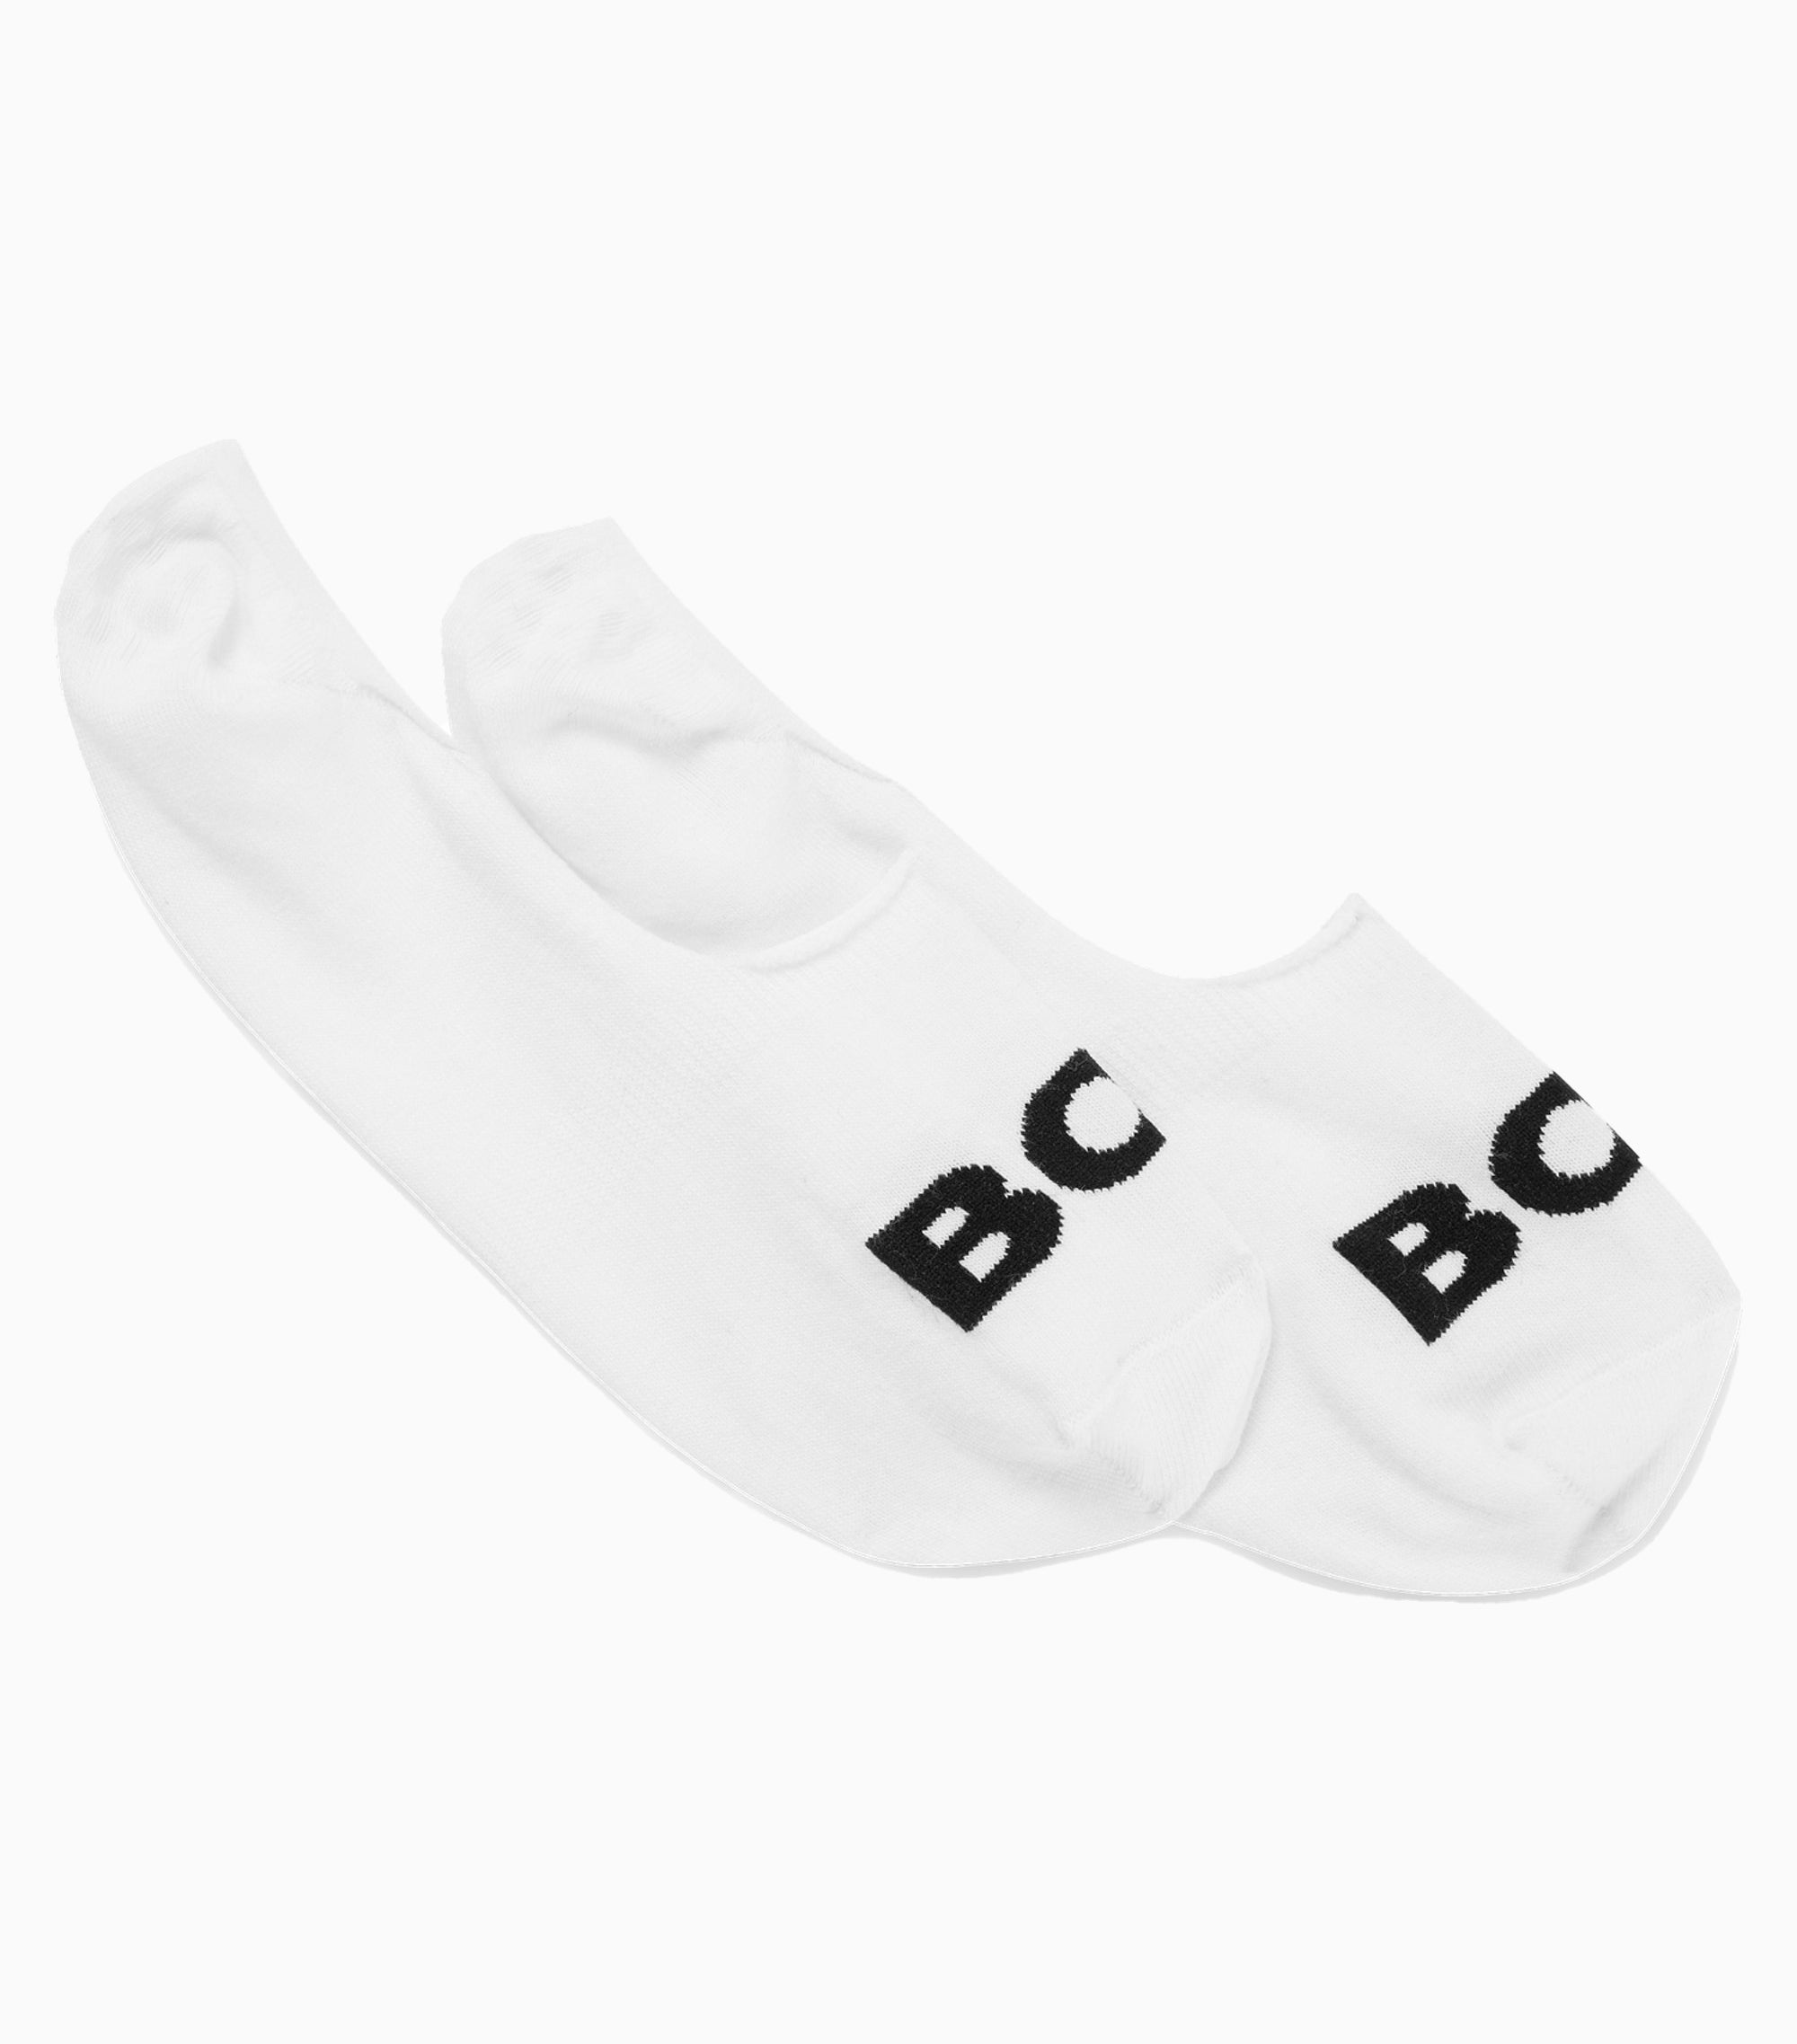 hugo-boss-mens-two-pack-of-invisible-socks-in-a-cotton-blend-50477866-100